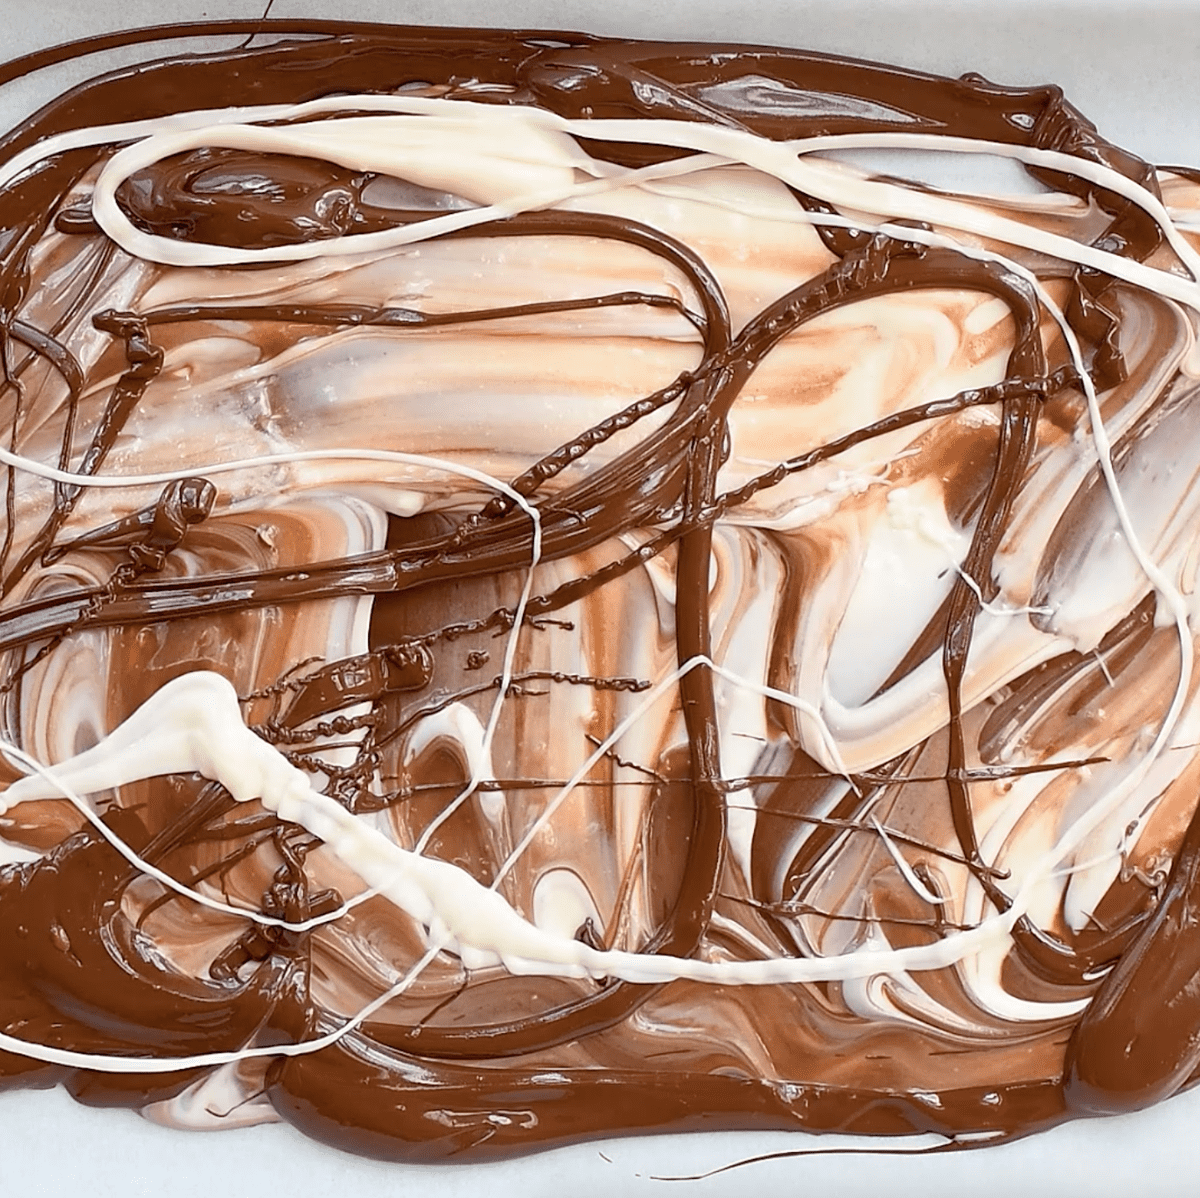 swirling chocolate and white chocolate together to make peppermint bark